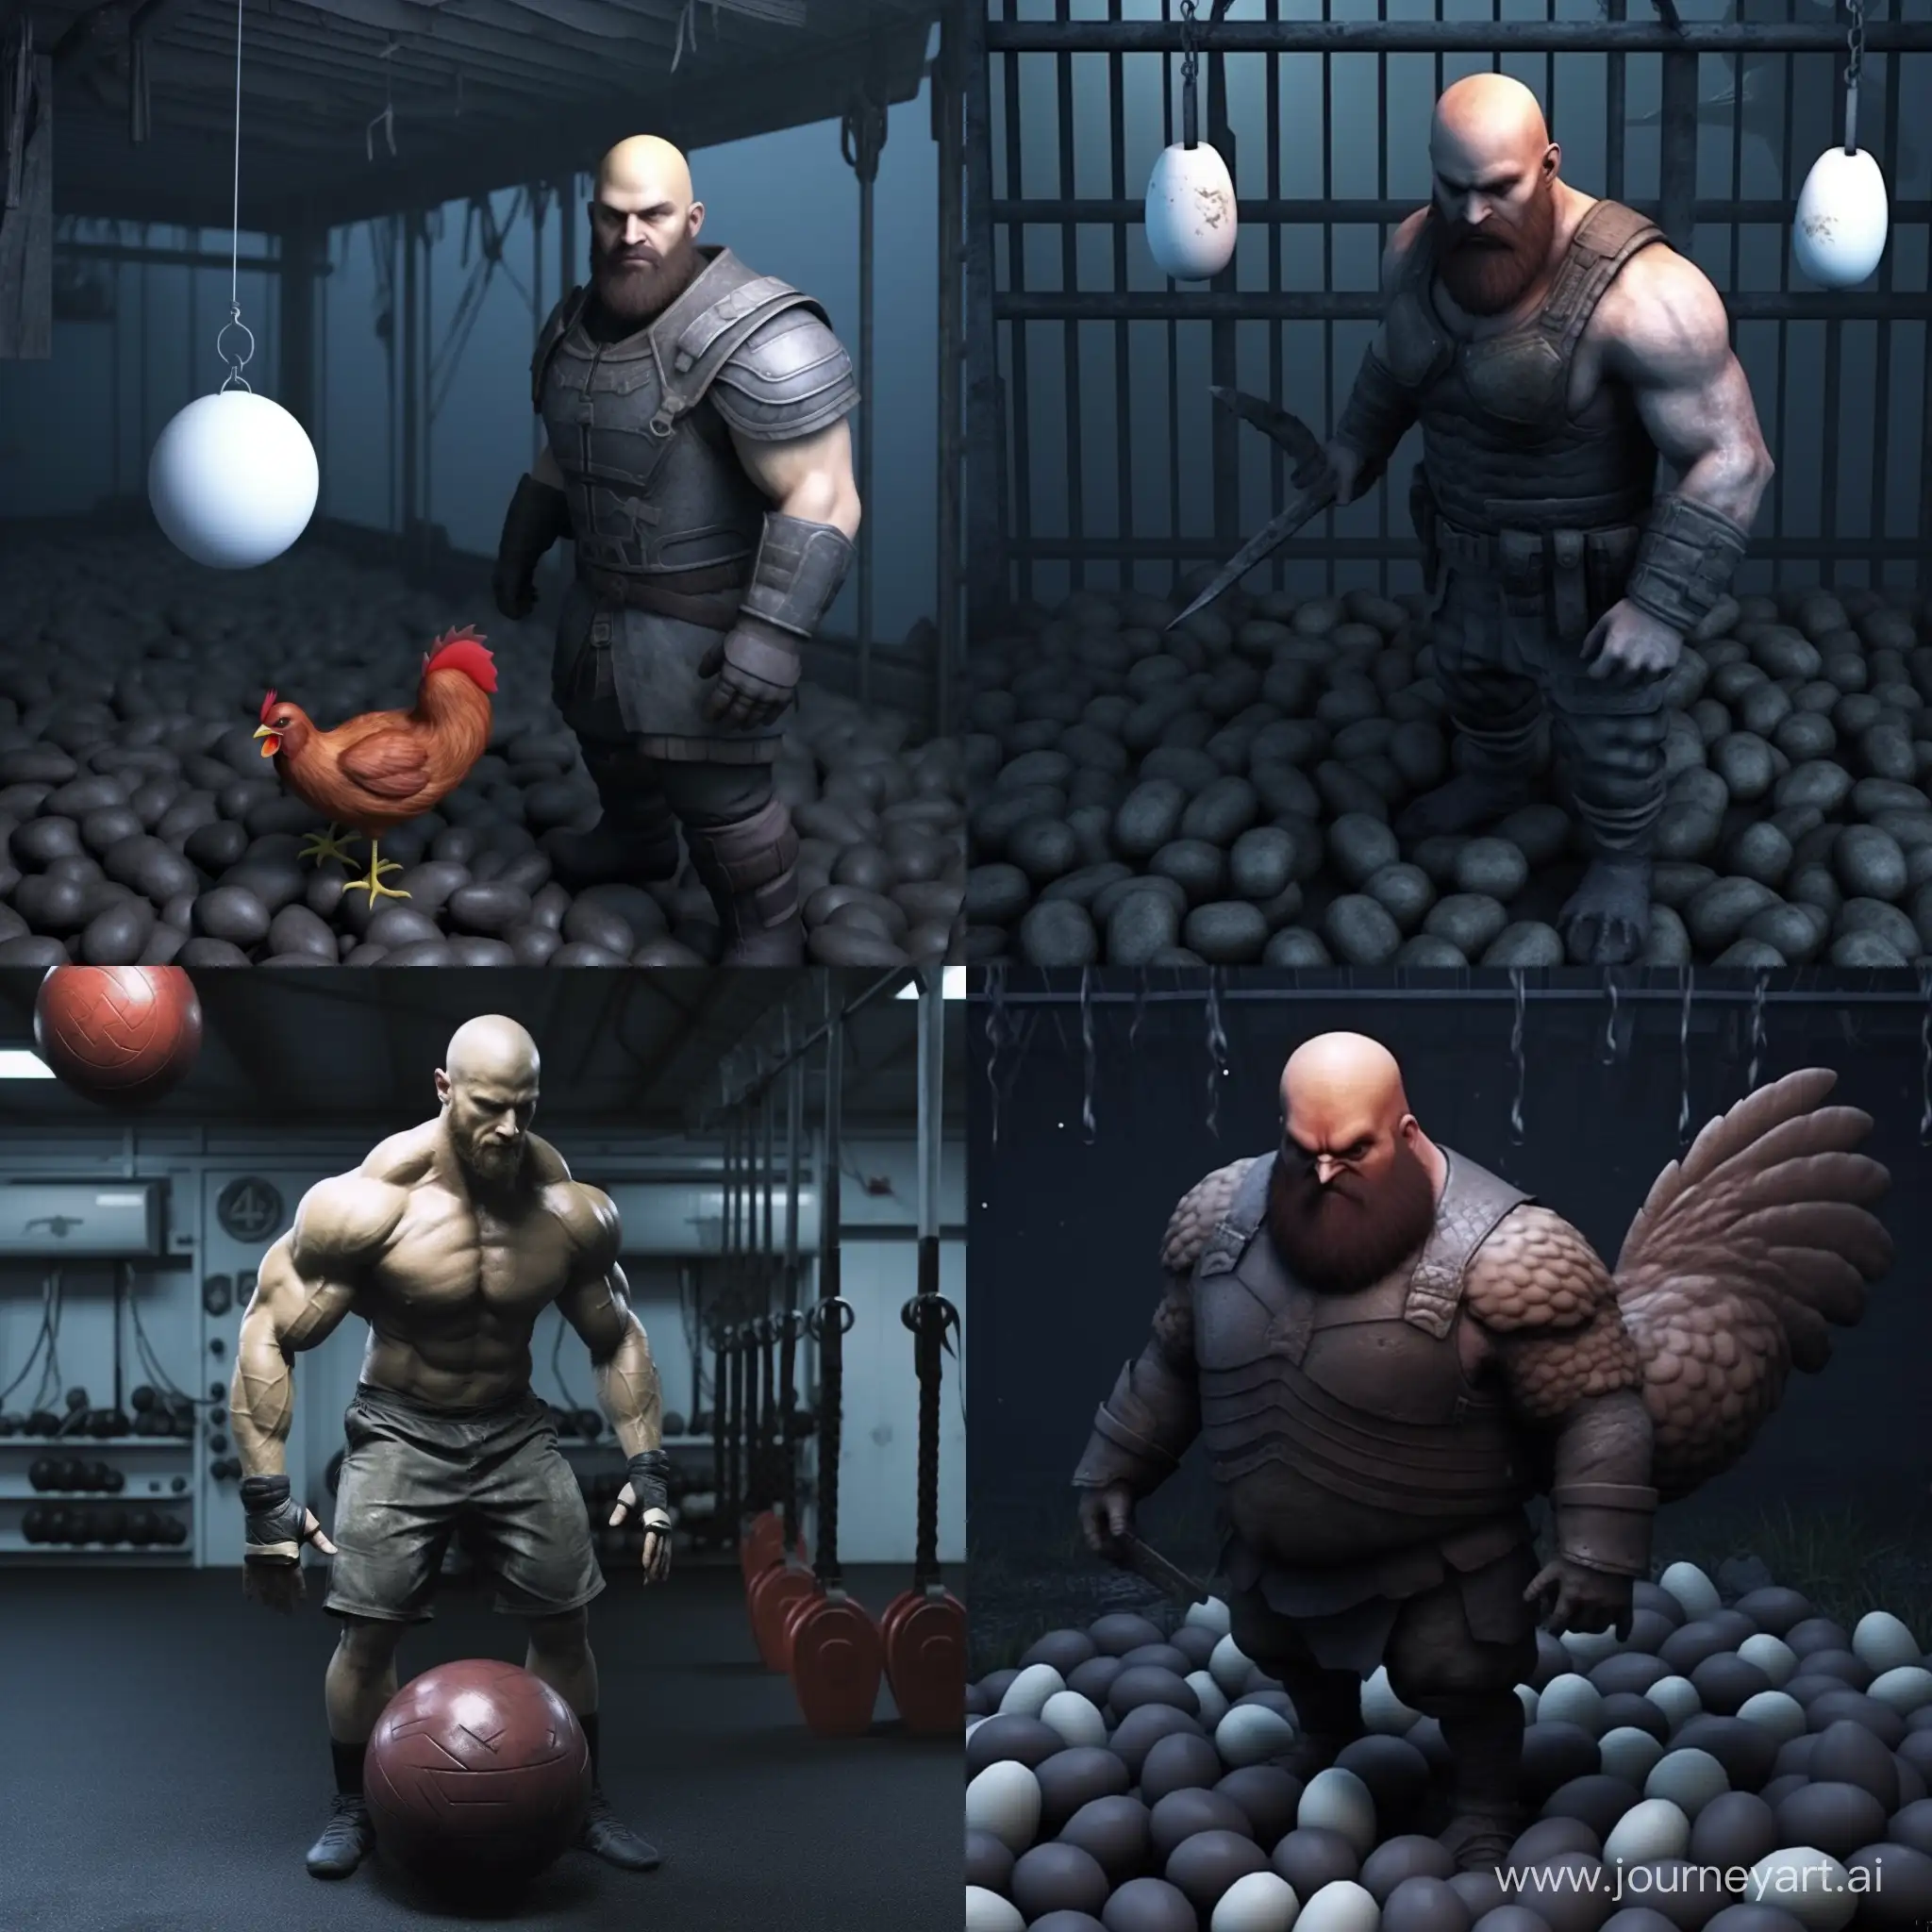 Artyom-Pumping-Chicken-Eggs-in-the-Gym-Workout-AR-Fitness